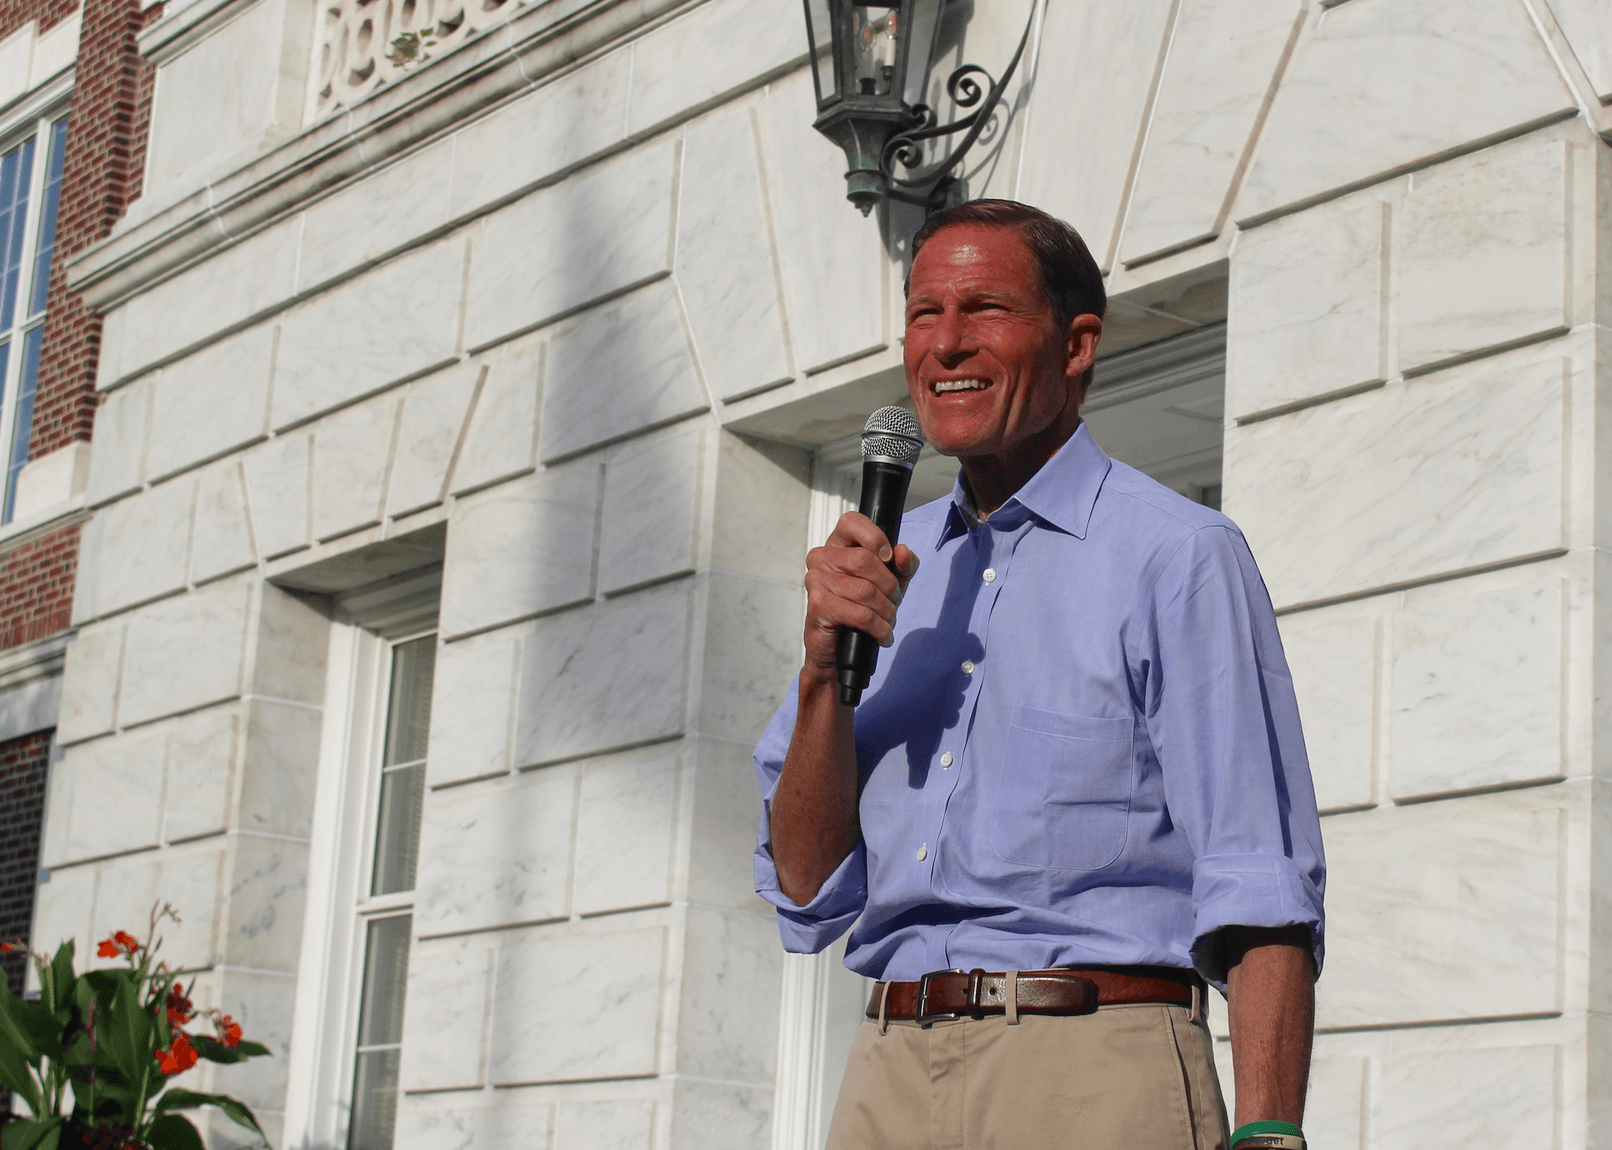 After violence erupted in Charlottesvilla on Saturday, US Senator Blumenthal addressed a crowd of about 100 at Greenwich Town Hall on Sunday evening. Aug 13, 2017 Credit: Leslie Yager